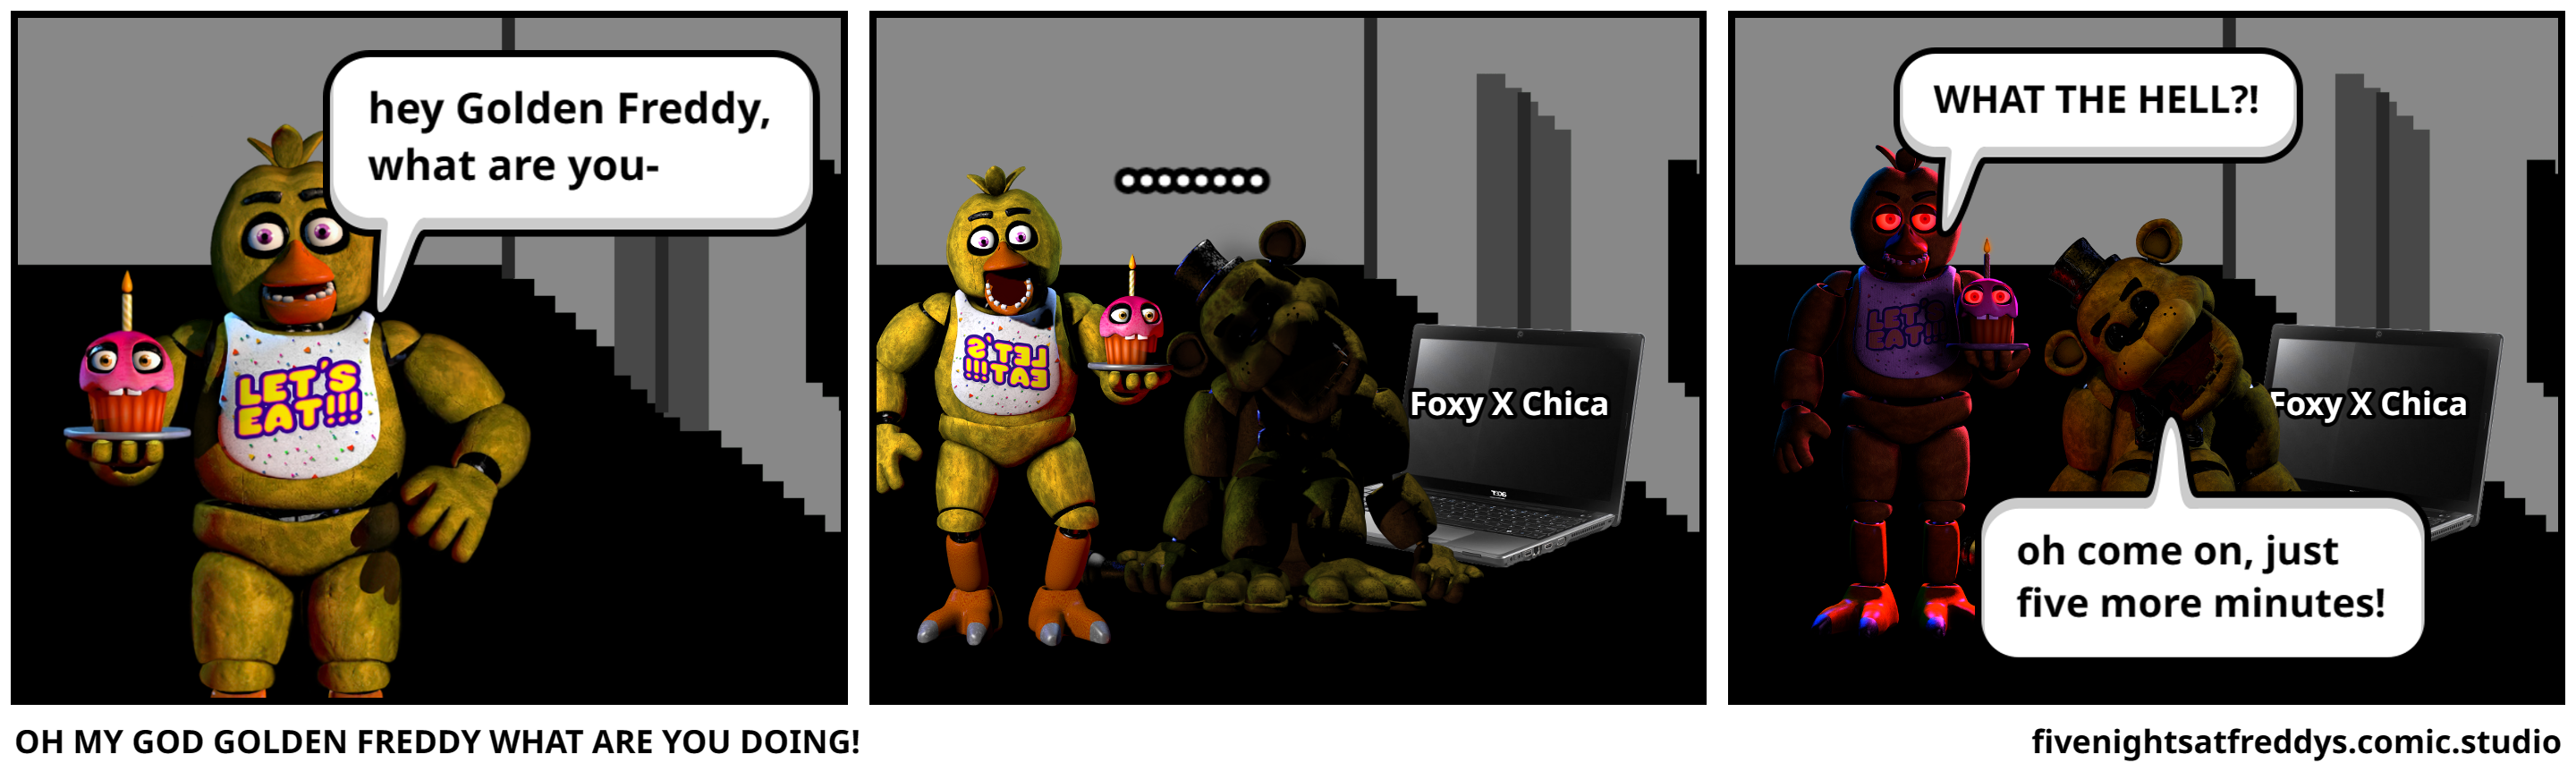 OH MY GOD GOLDEN FREDDY WHAT ARE YOU DOING!